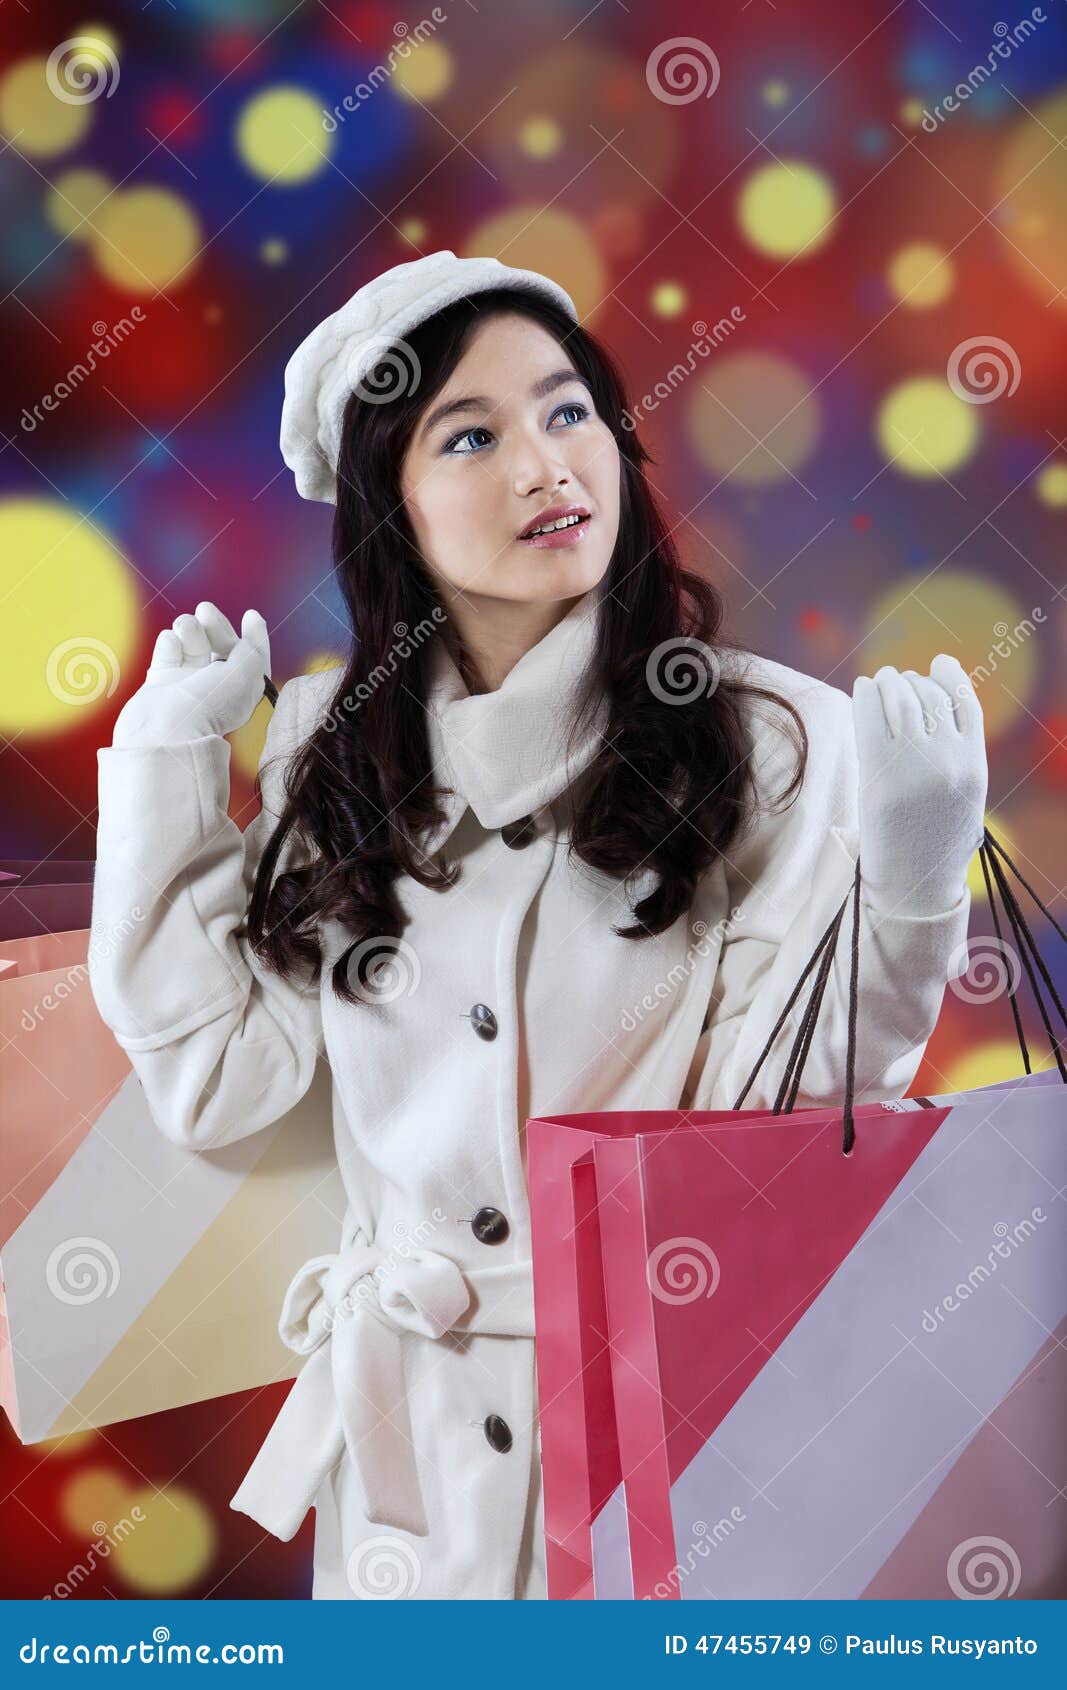 Attractive Girl Carrying Shopping Bags Stock Image - Image of beauty ...